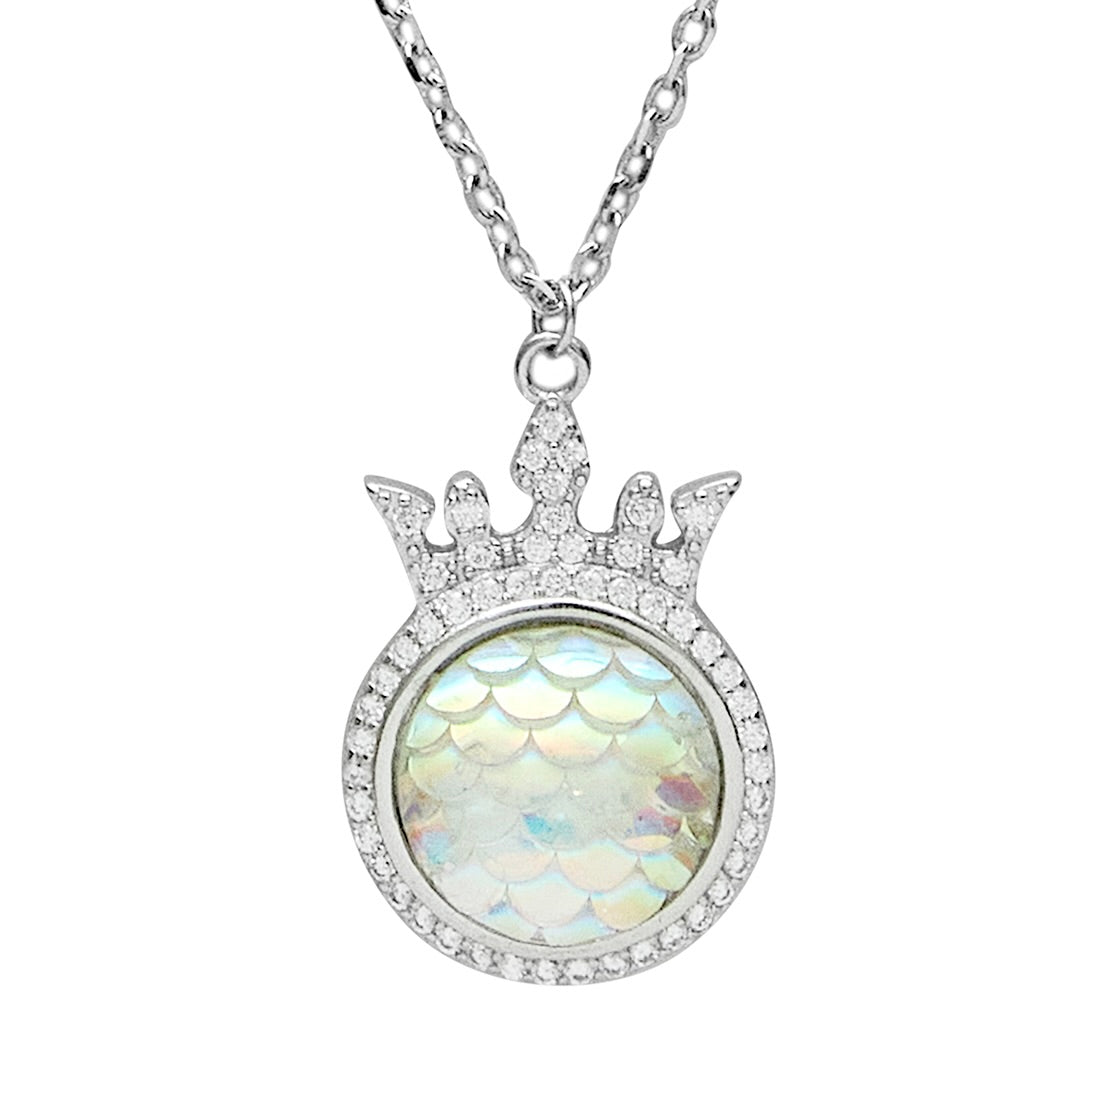 Tree of Life Glass Dome necklace